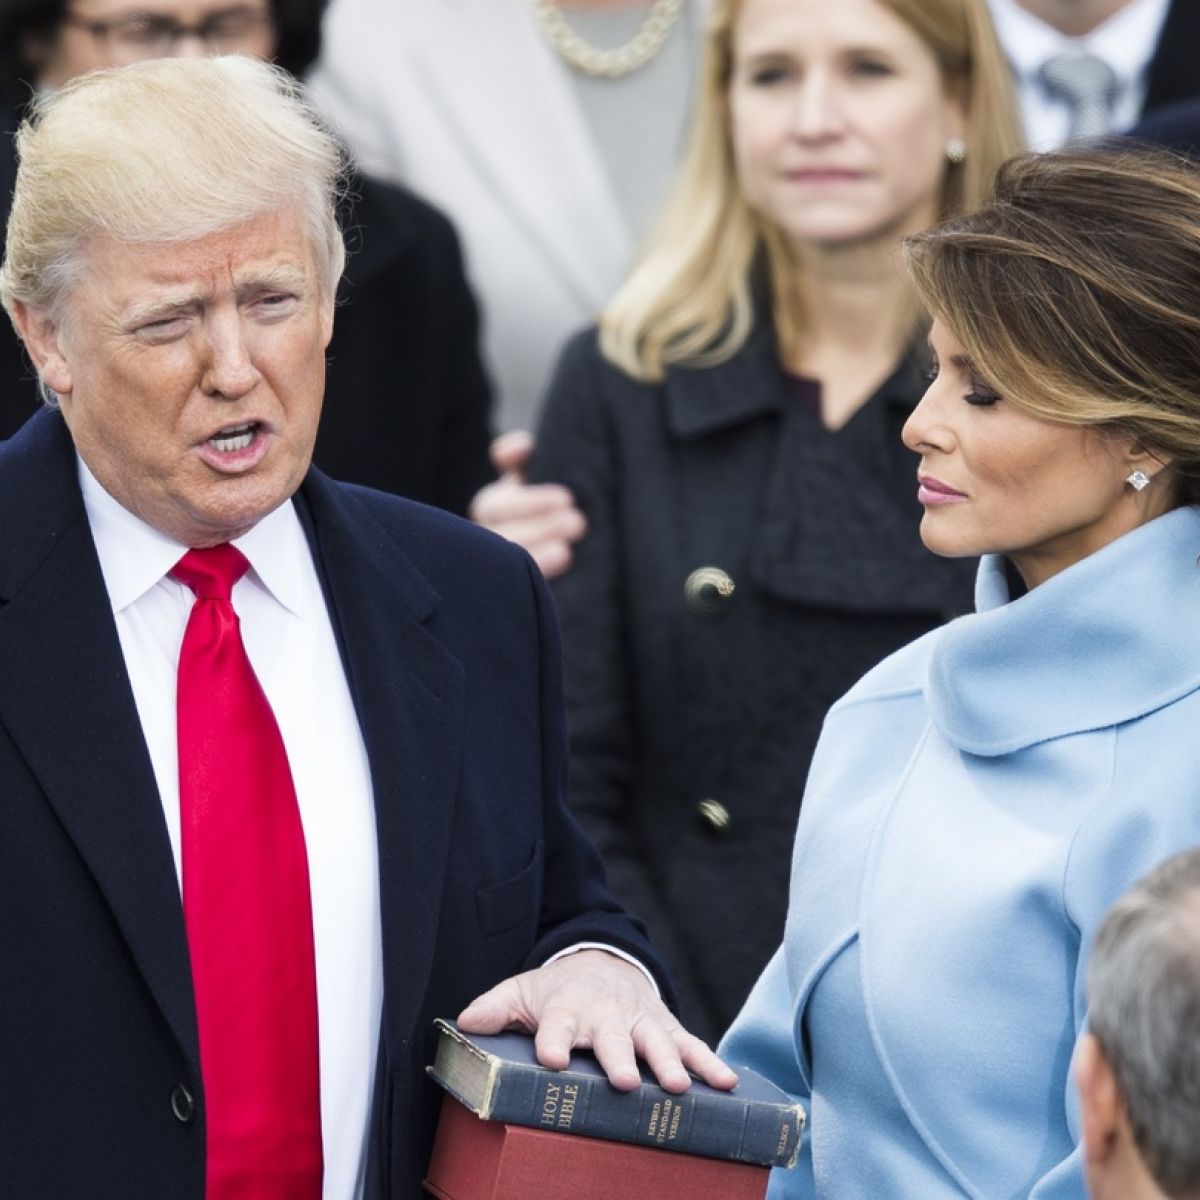 Trump Seriously Considered Taking The Oath Of Office On His Bestseller The Art Of The Deal